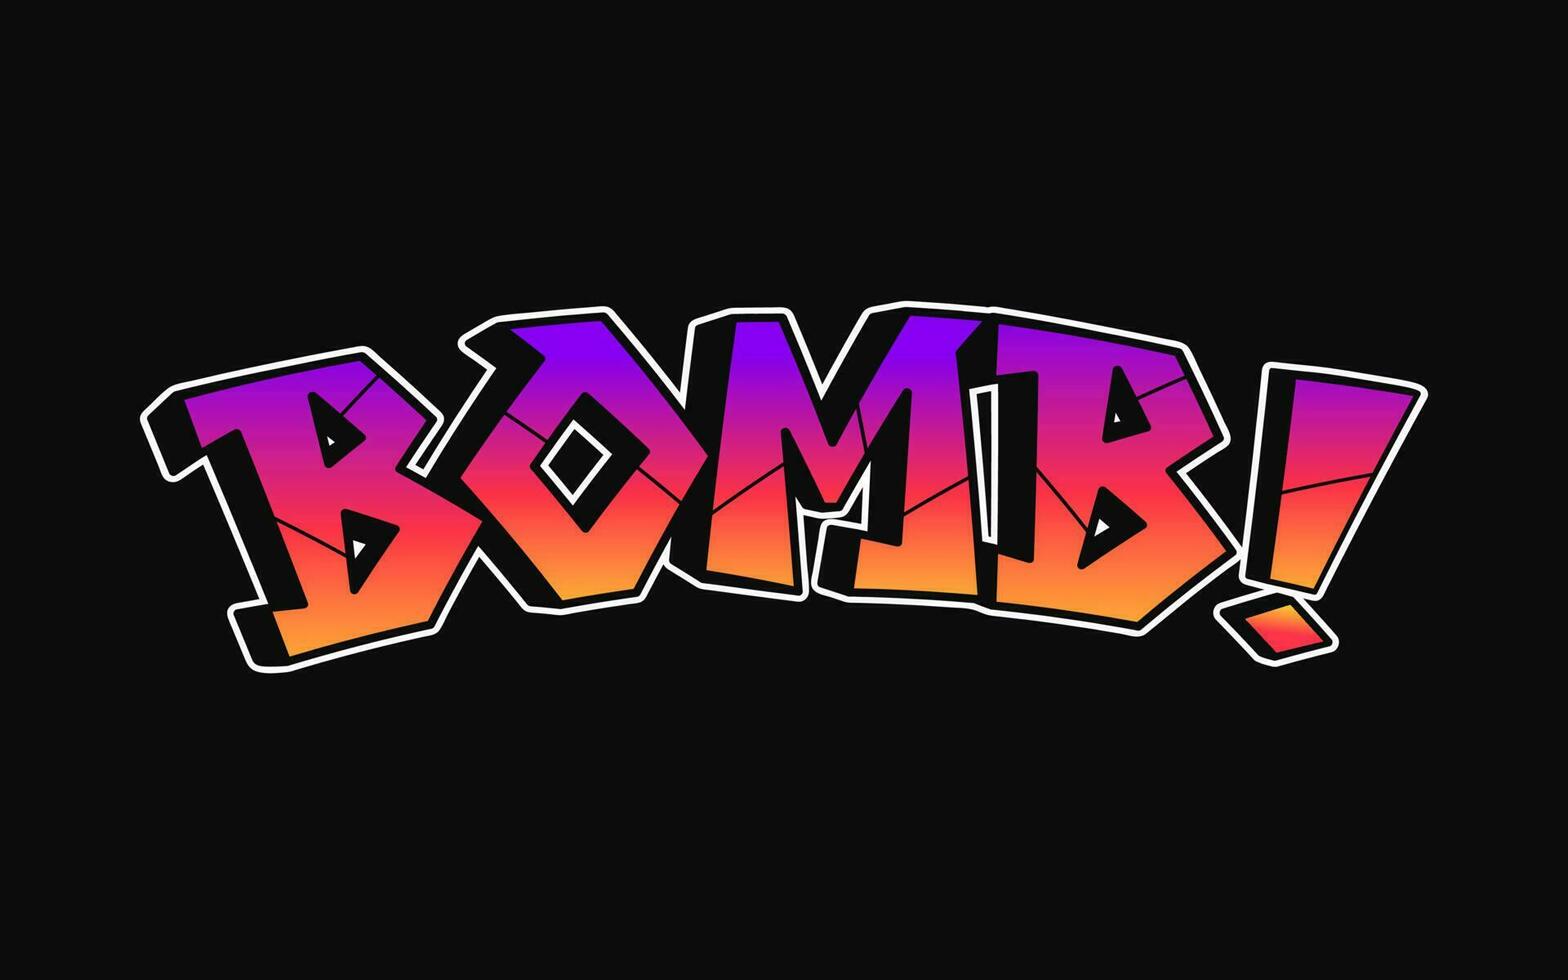 Bomb - single word, letters graffiti style. Vector hand drawn logo. Funny cool trippy word Bomb, fashion, graffiti style print t-shirt, poster concept